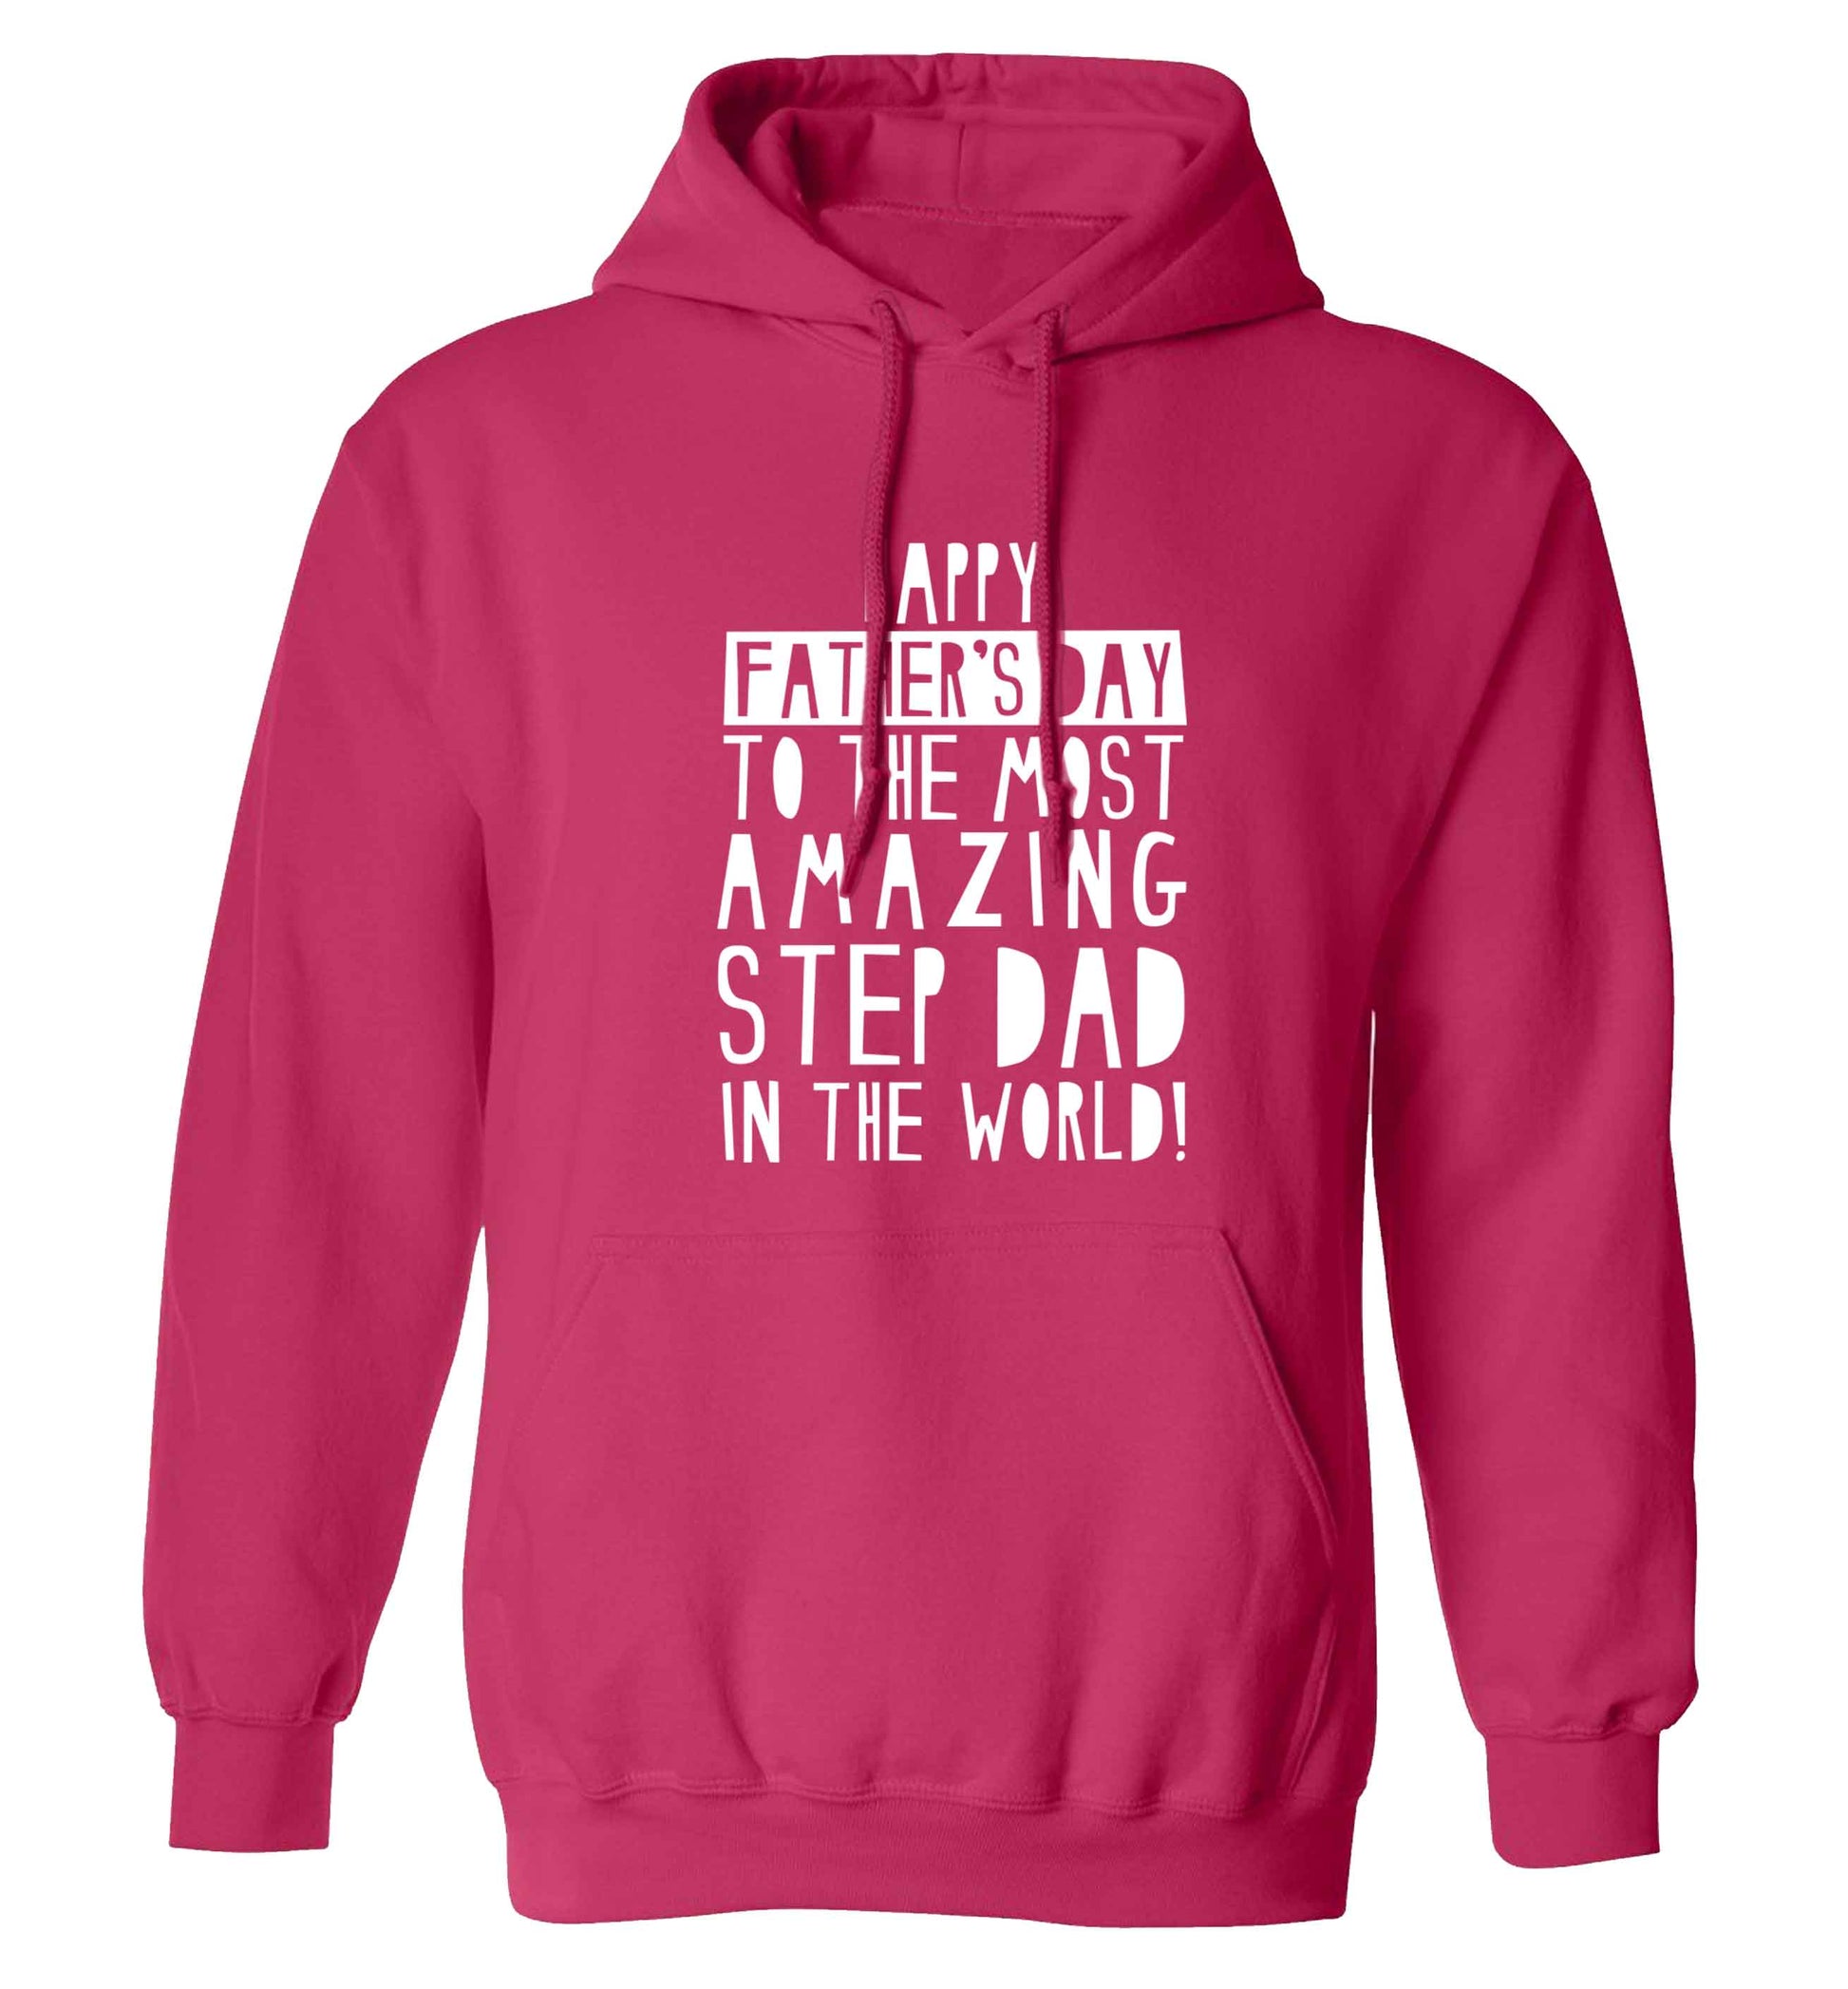 Happy Father's day to the best step dad in the world adults unisex pink hoodie 2XL